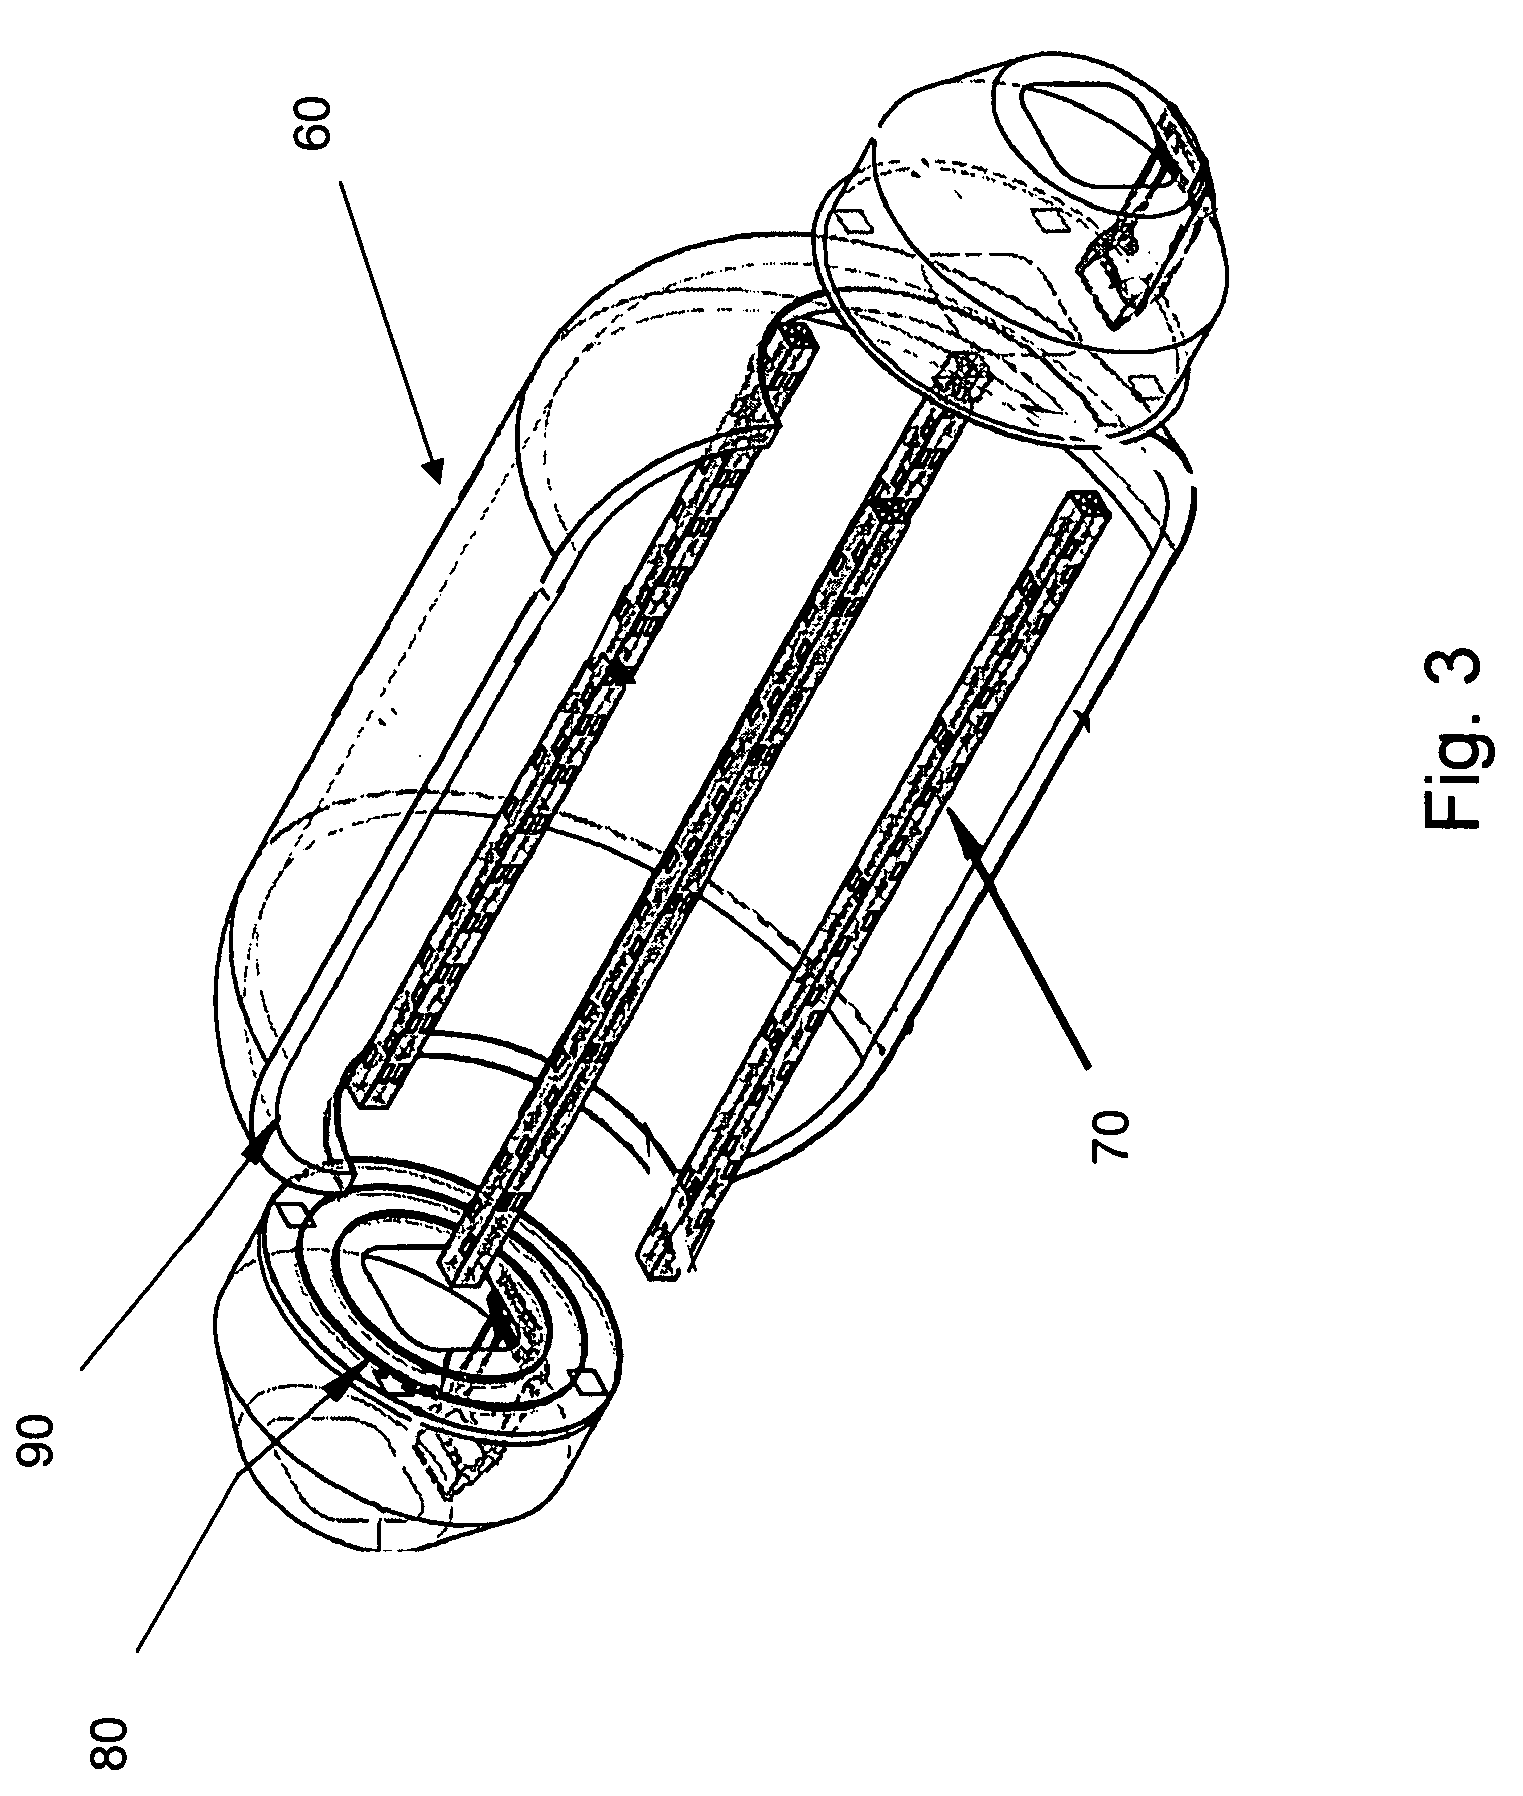 Shear-thickening fluid reinforced fabrics for use with an expandable spacecraft